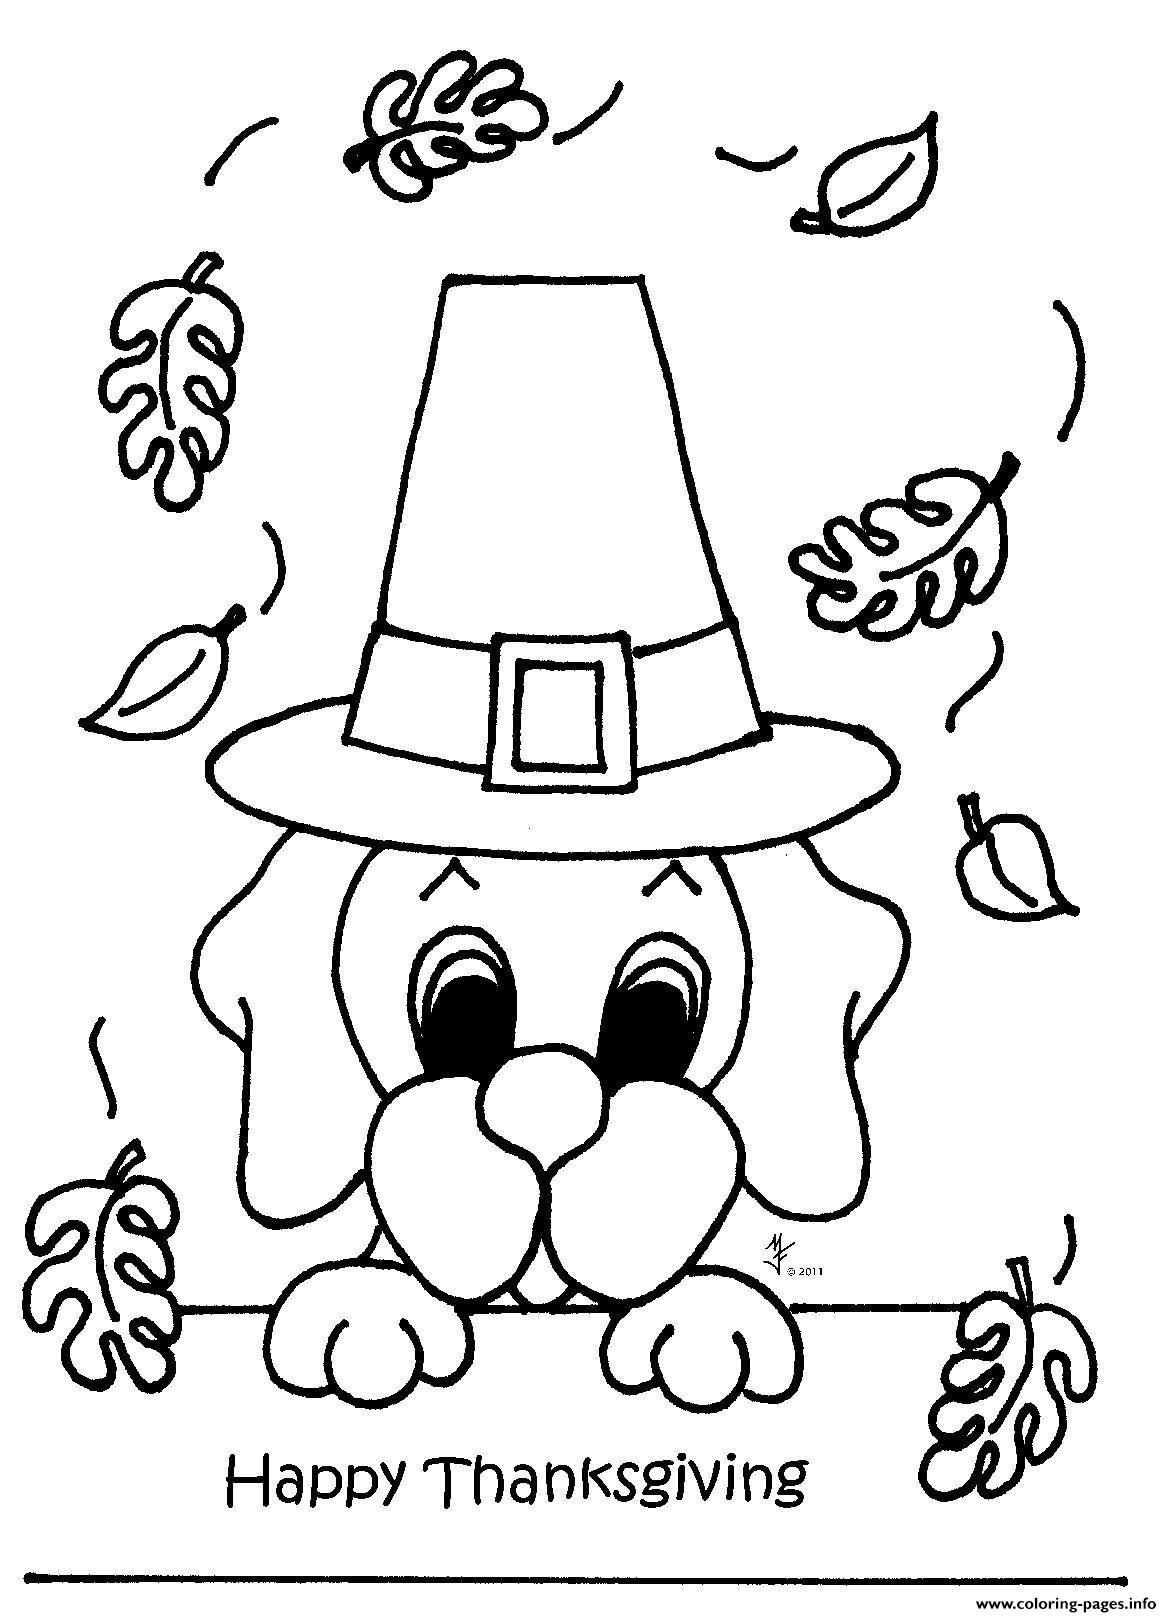 November Thanksgiving coloring pages